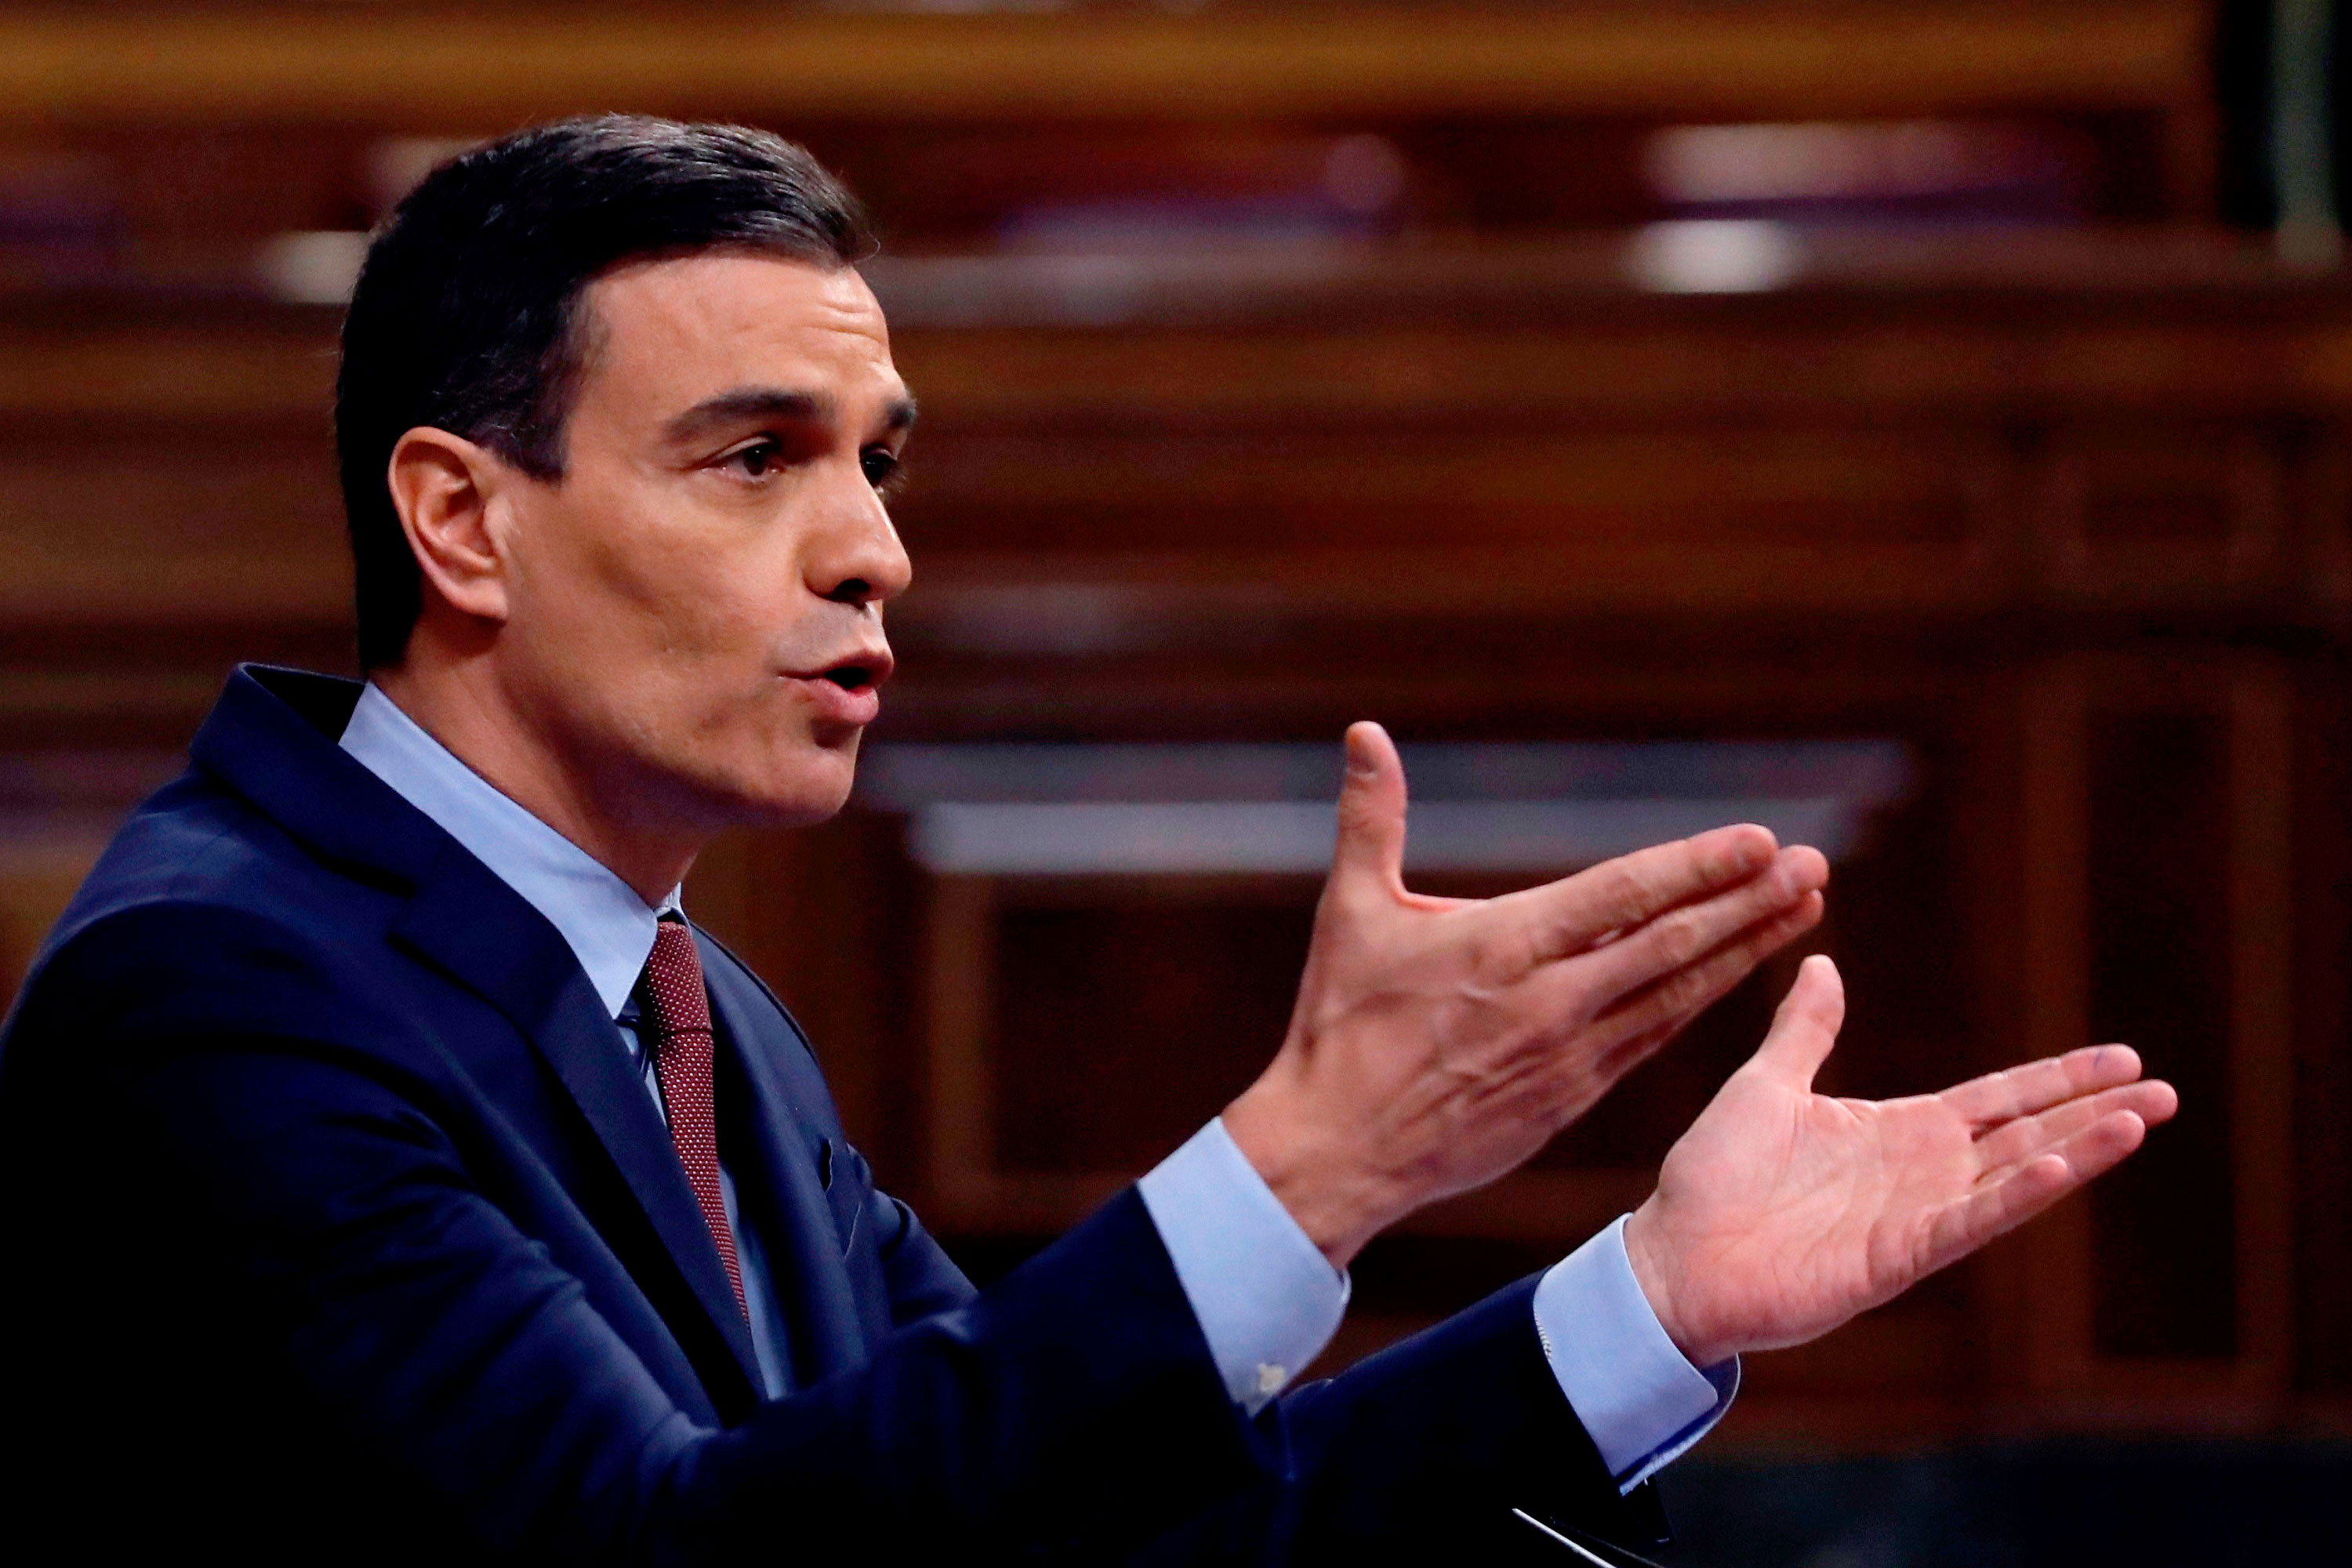 Spanish Prime Minister Pedro Sanchez delivers a speech on May 6.